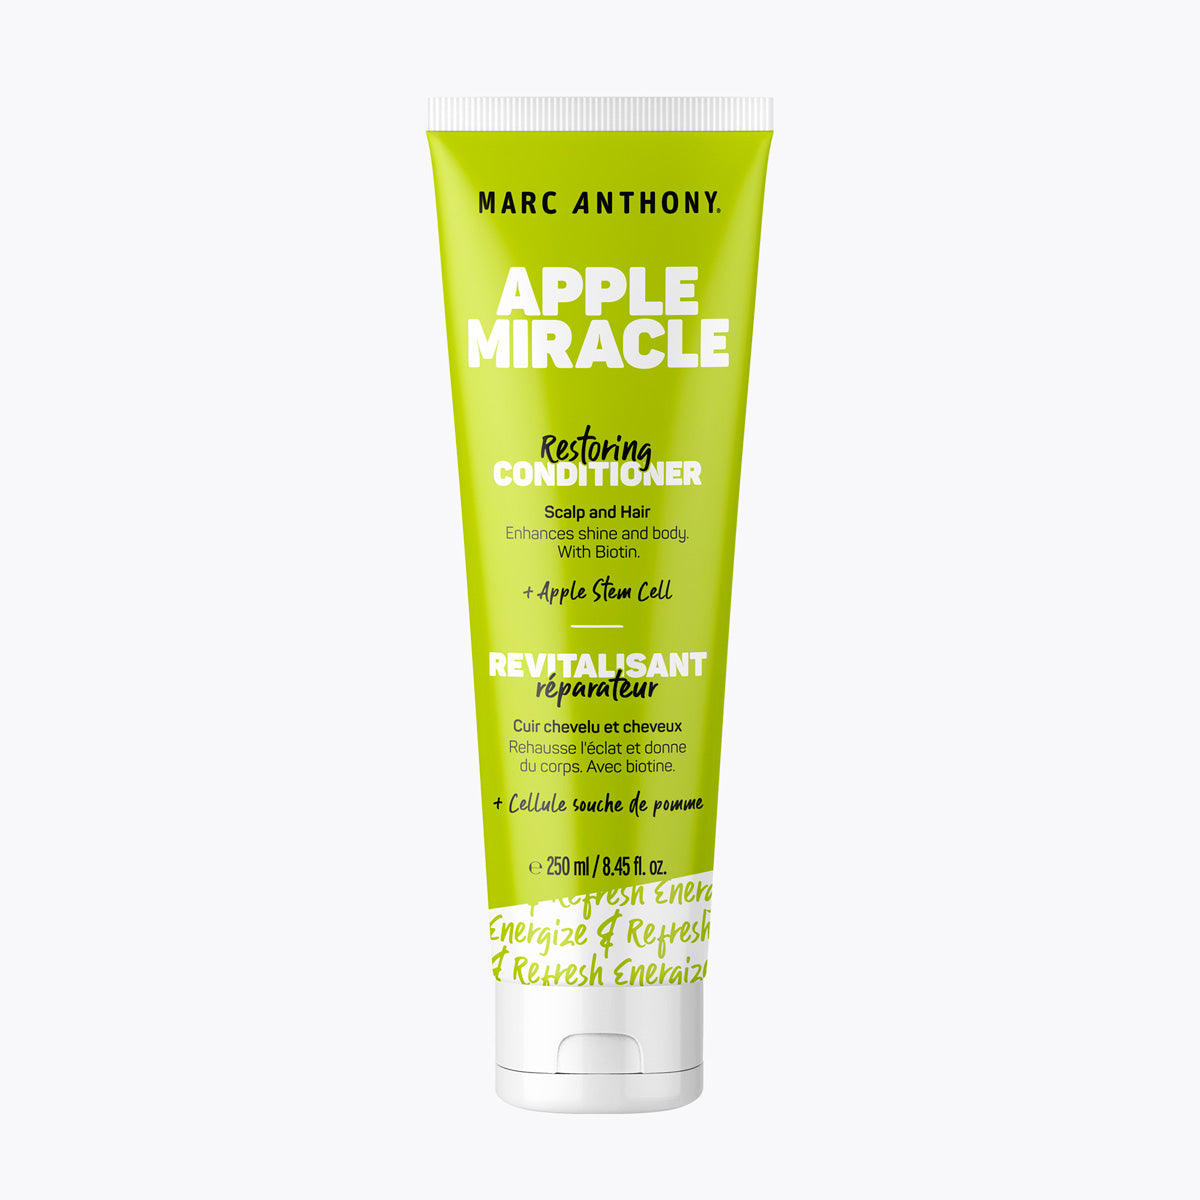 Apple Miracle <br> Restoring Conditioner